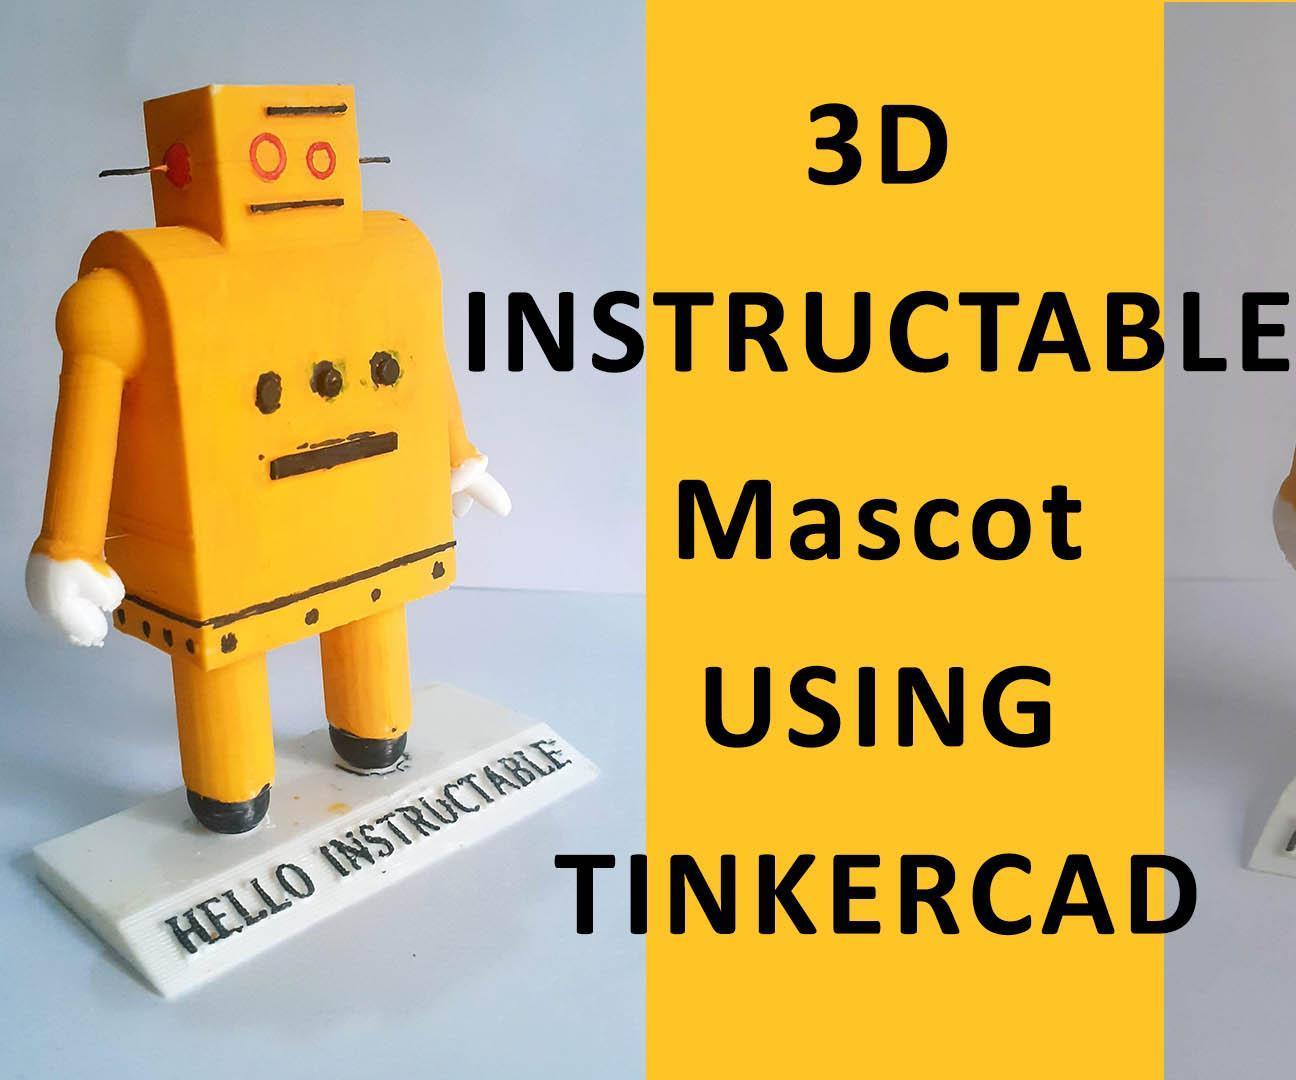 3D INSTRUCTABLE  MASCOT  USING TINKERCAD